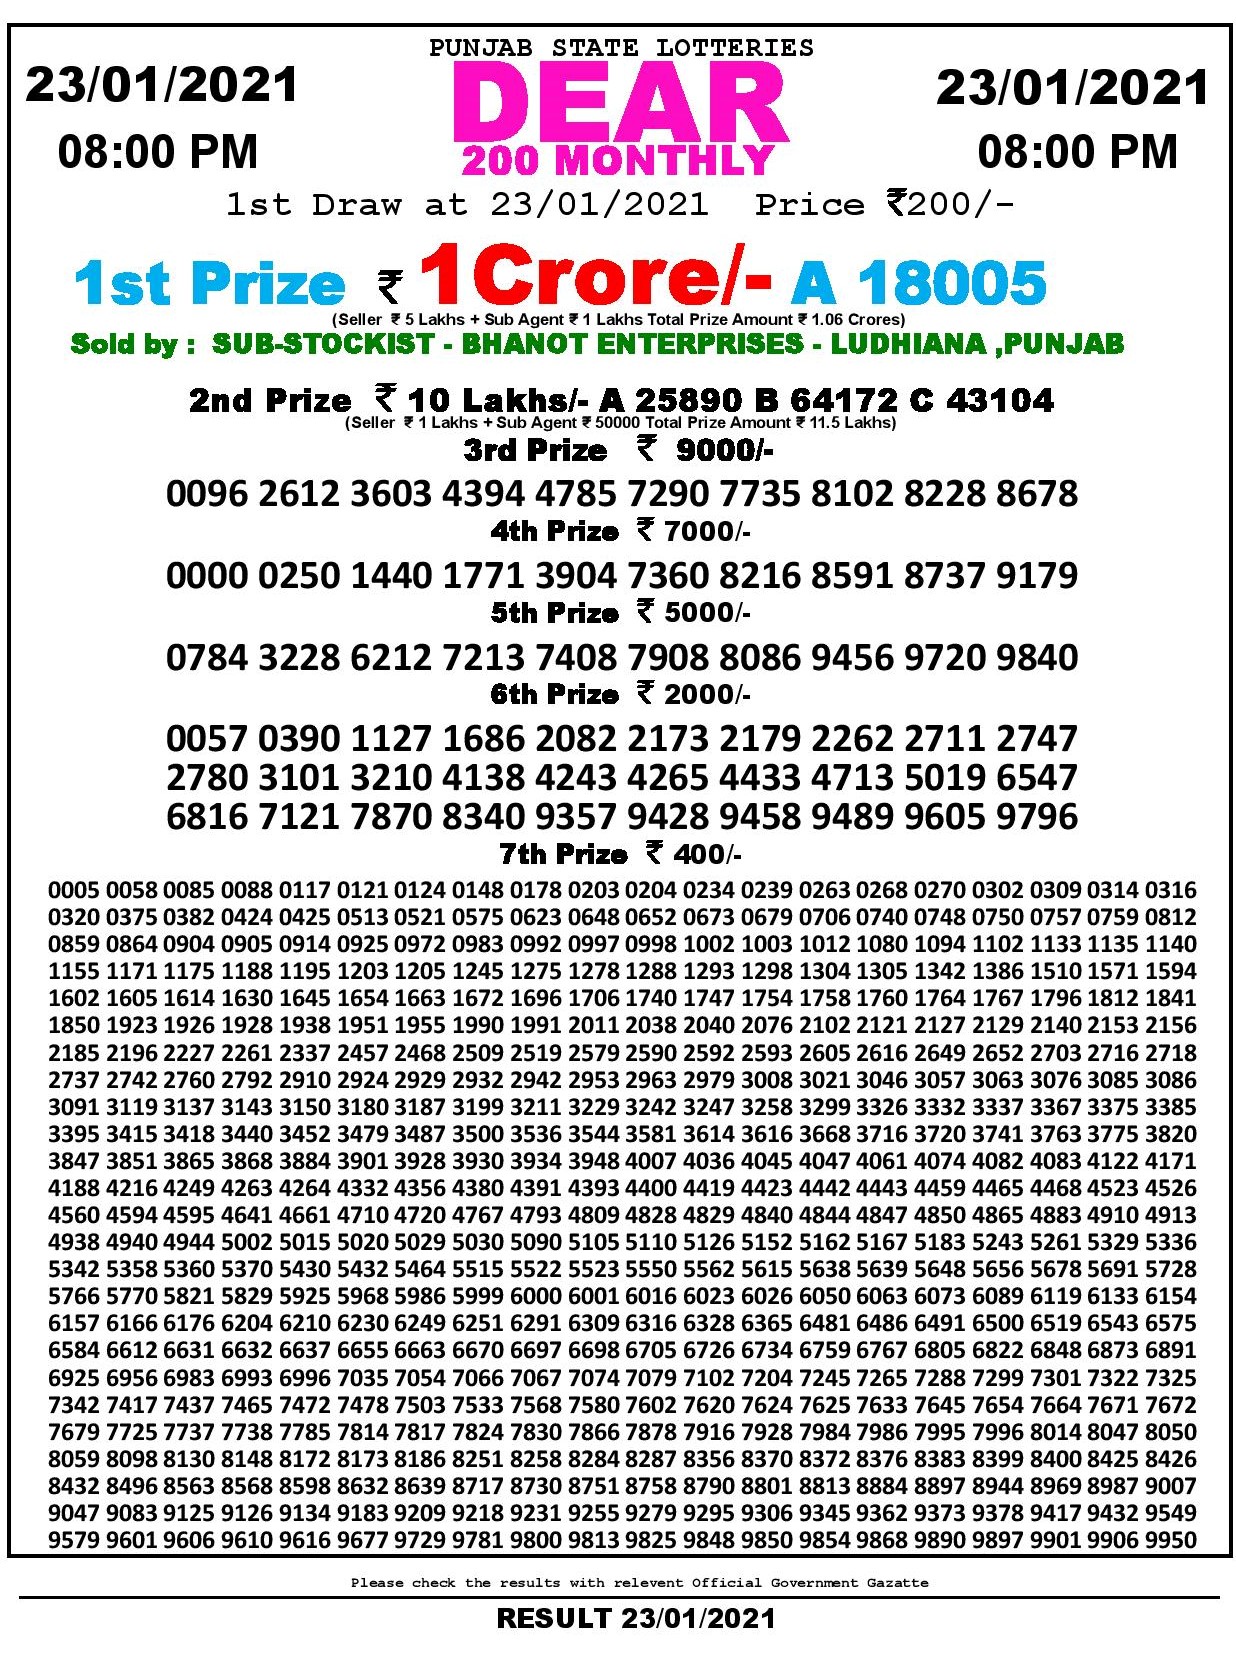 DEAR 200 MONTHLY 8PM LOTTERY RESULT 23.1.2021